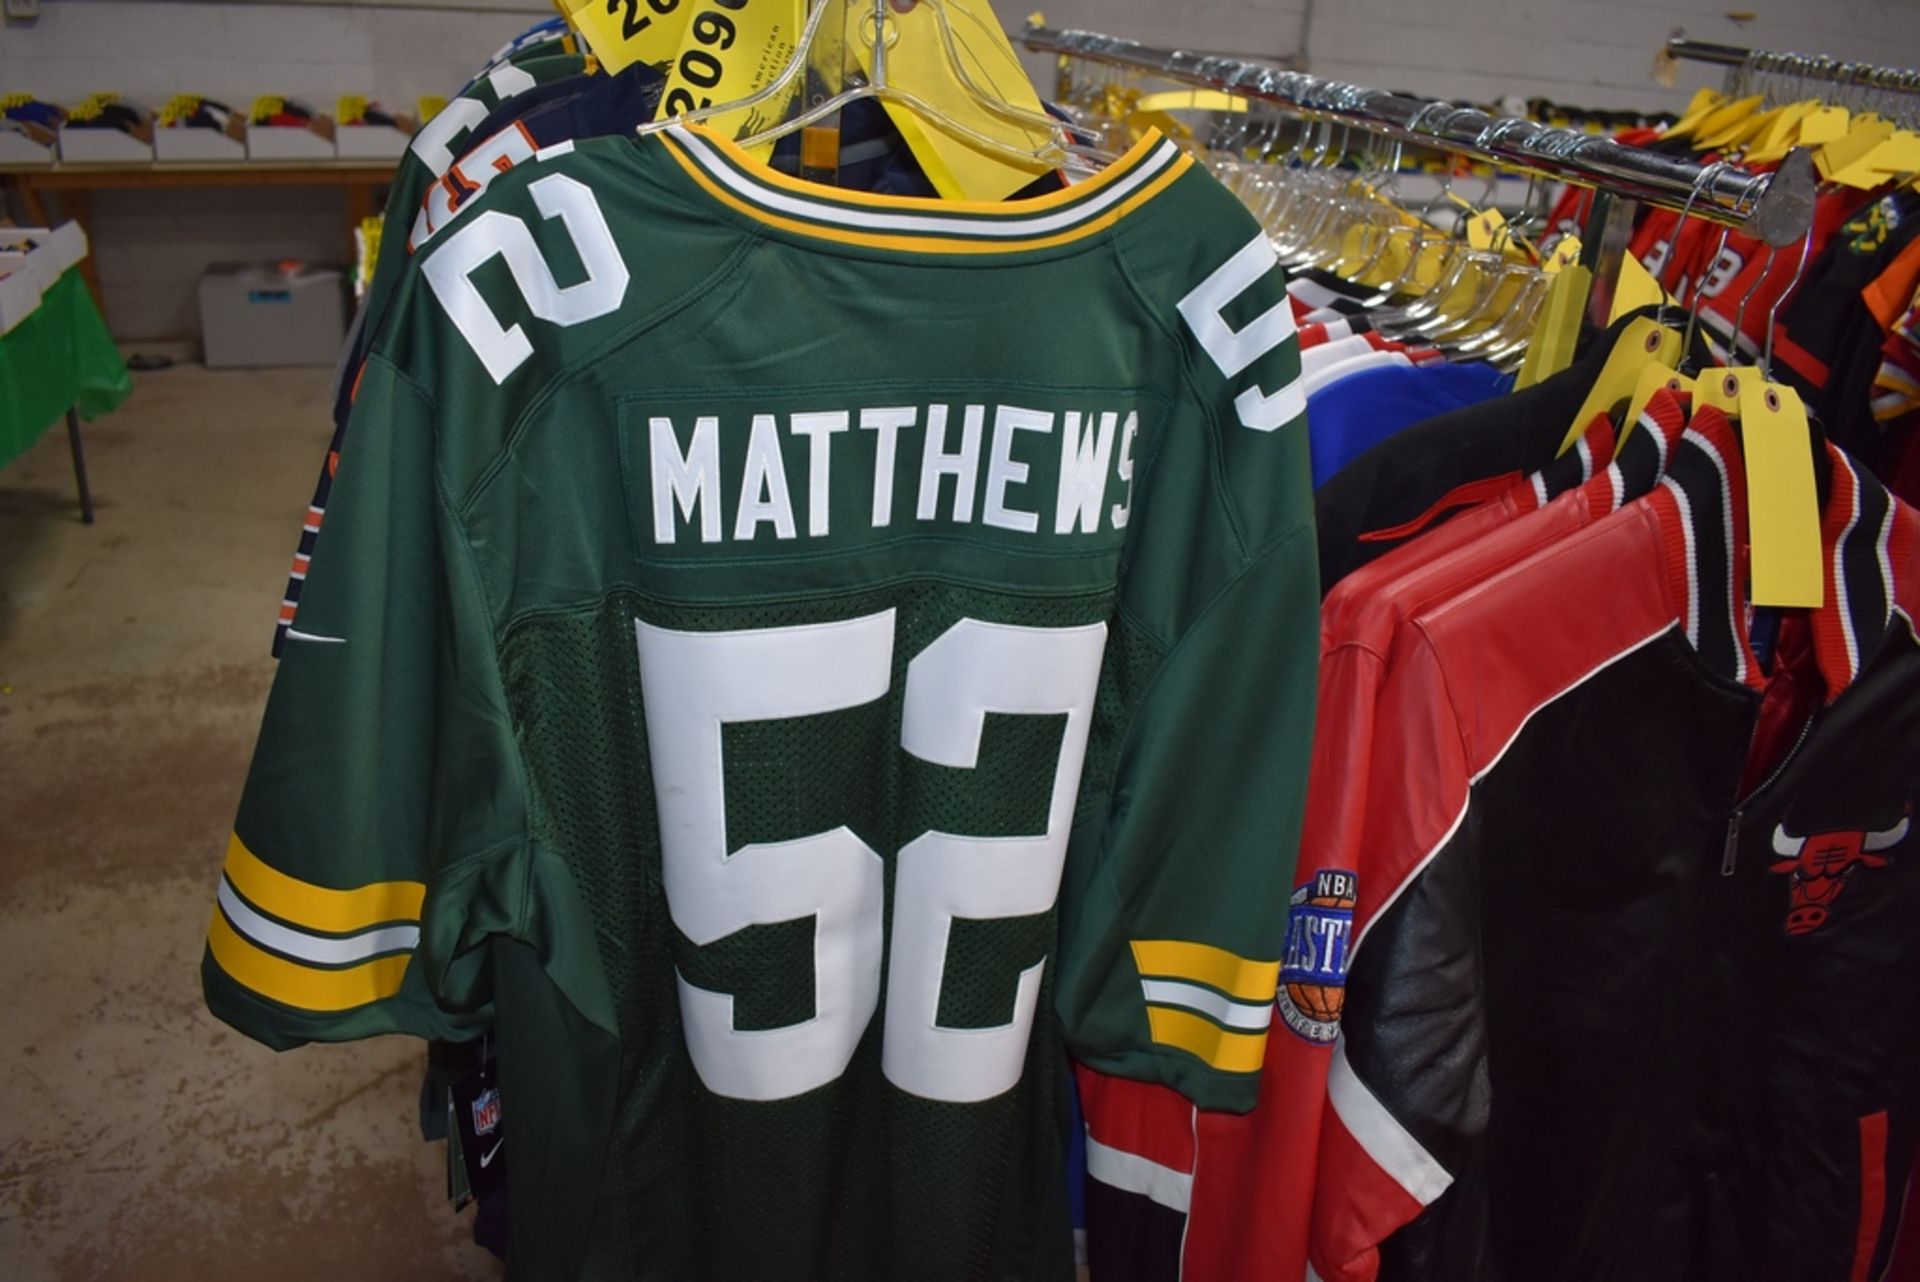 GREEN BAY PACKERS NIKE #52 CLAY MATTHEWS 2X-LARGE JERSEY - Image 2 of 2